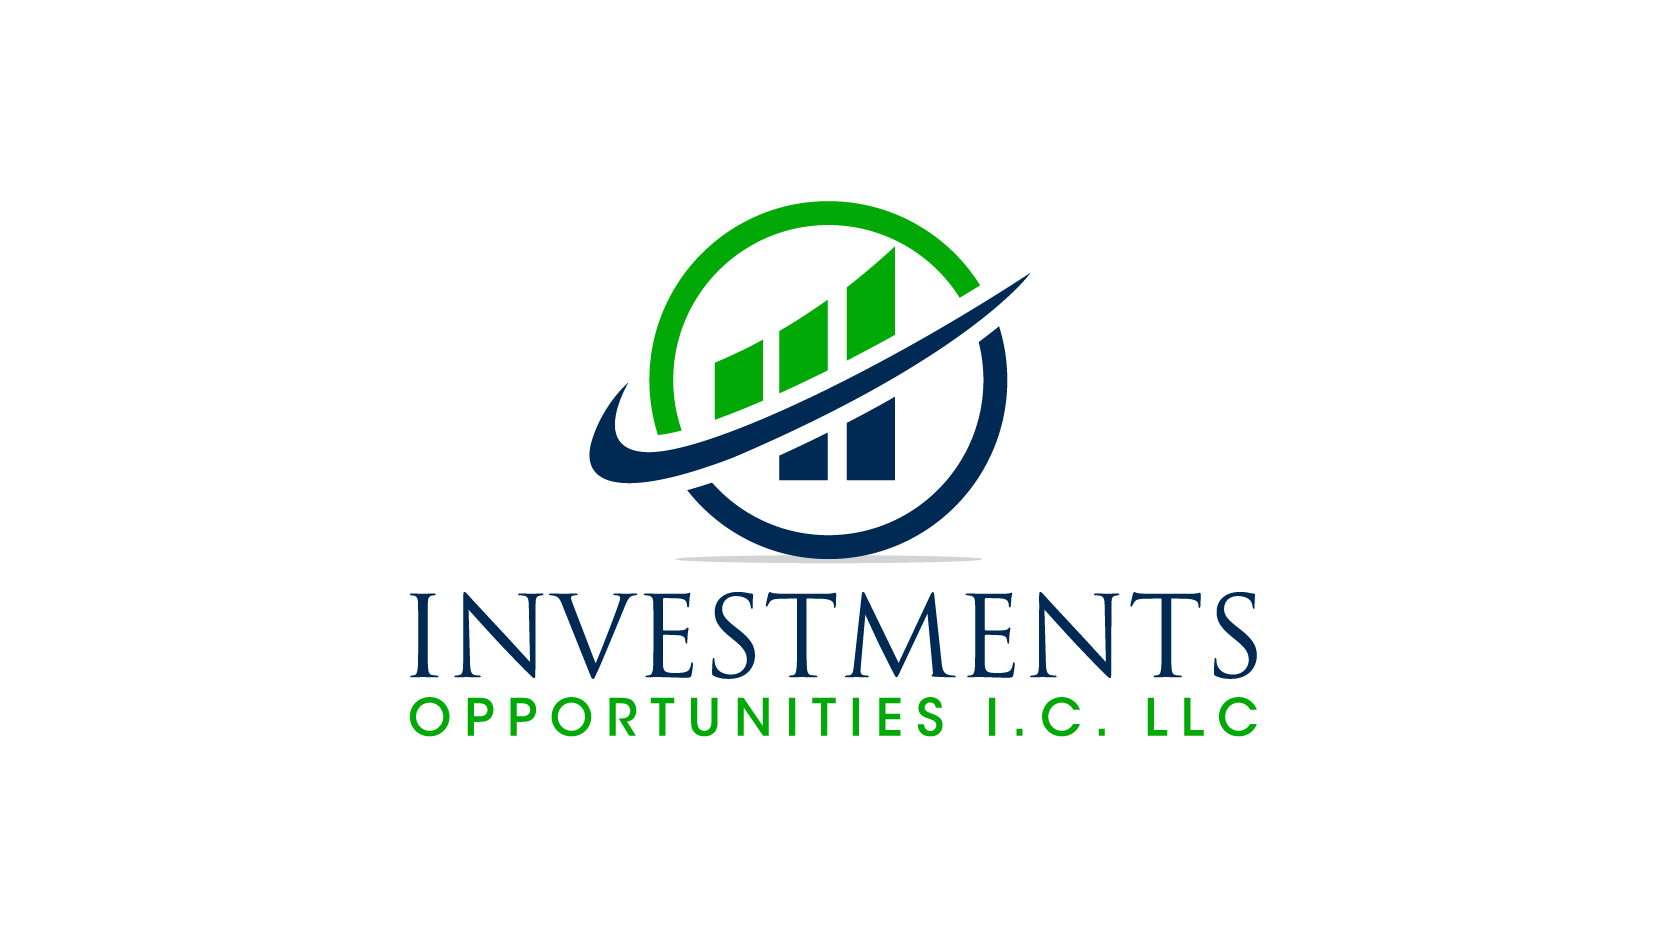 U. S. Invesments Company Logo - Investment Opportunities